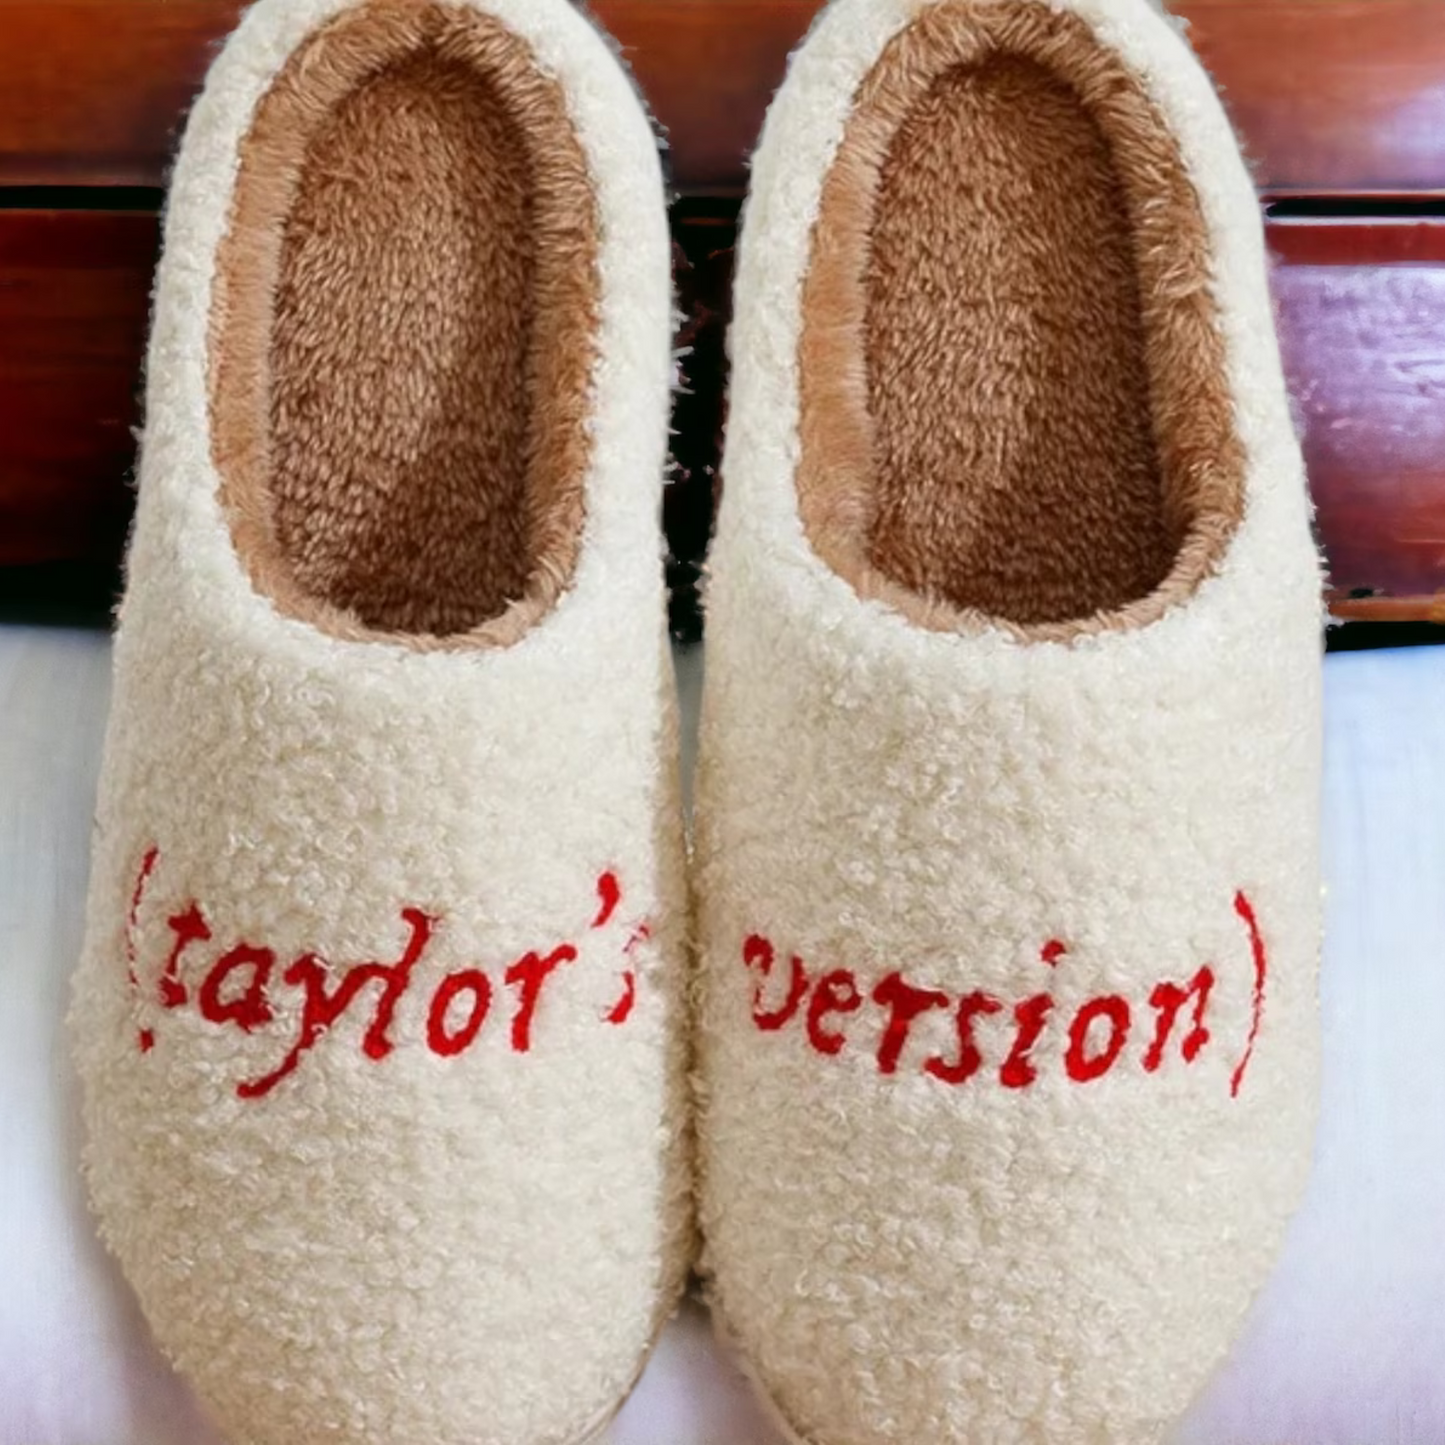 Taylors Version Slippers with red text